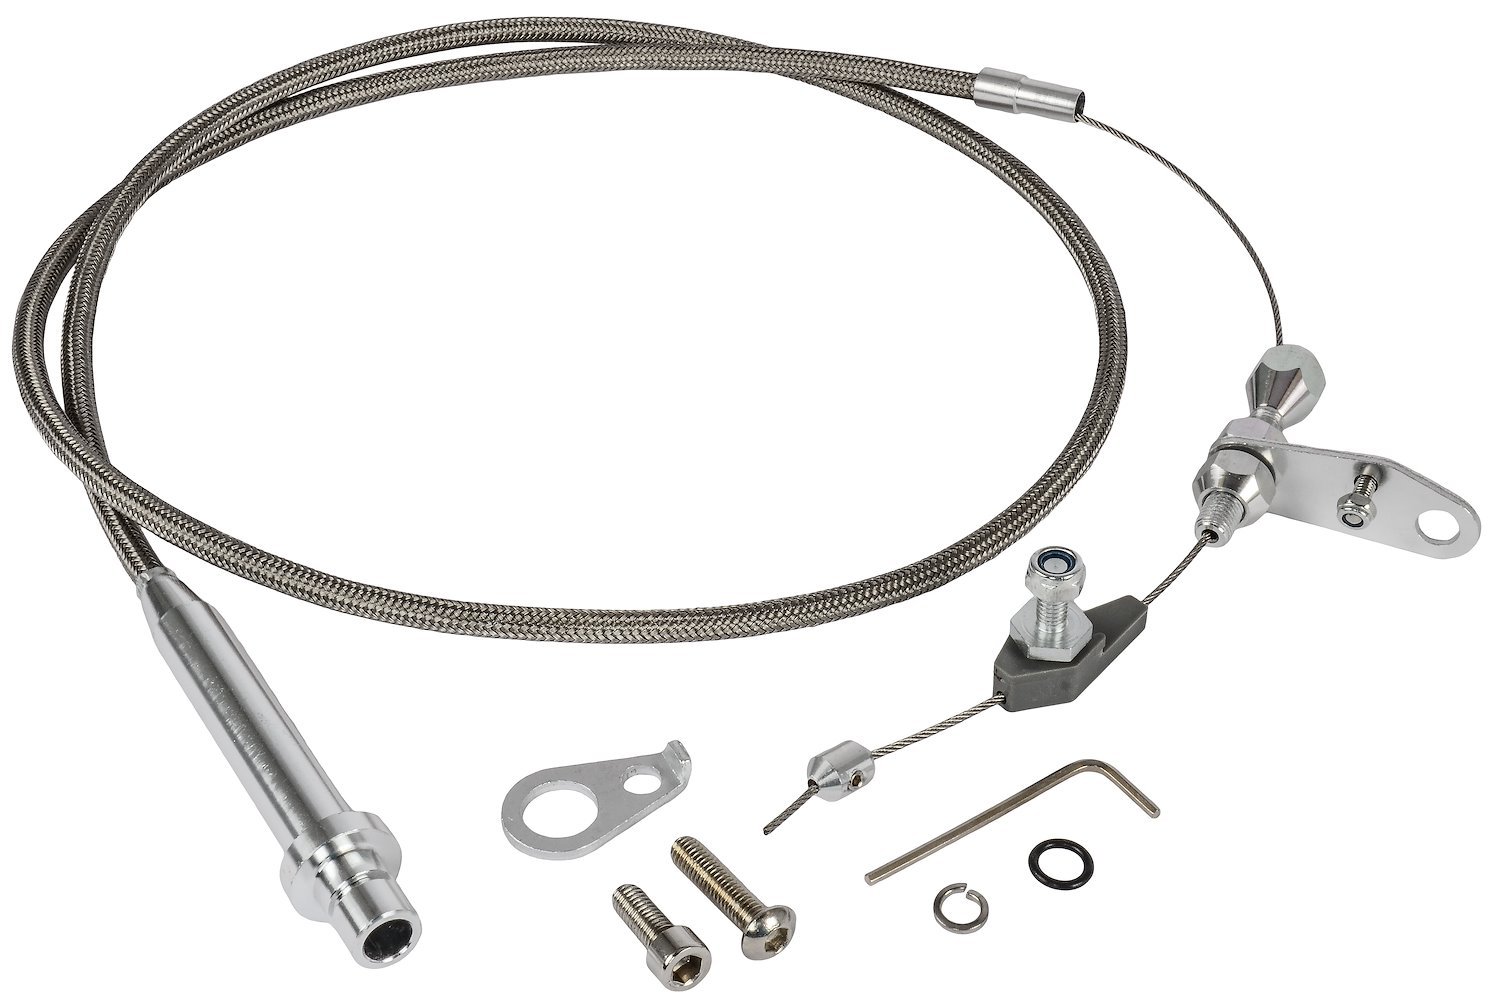 Transmission Kickdown Cable Kit [Small Block GMC/Chevy TH350, Stainless Steel]